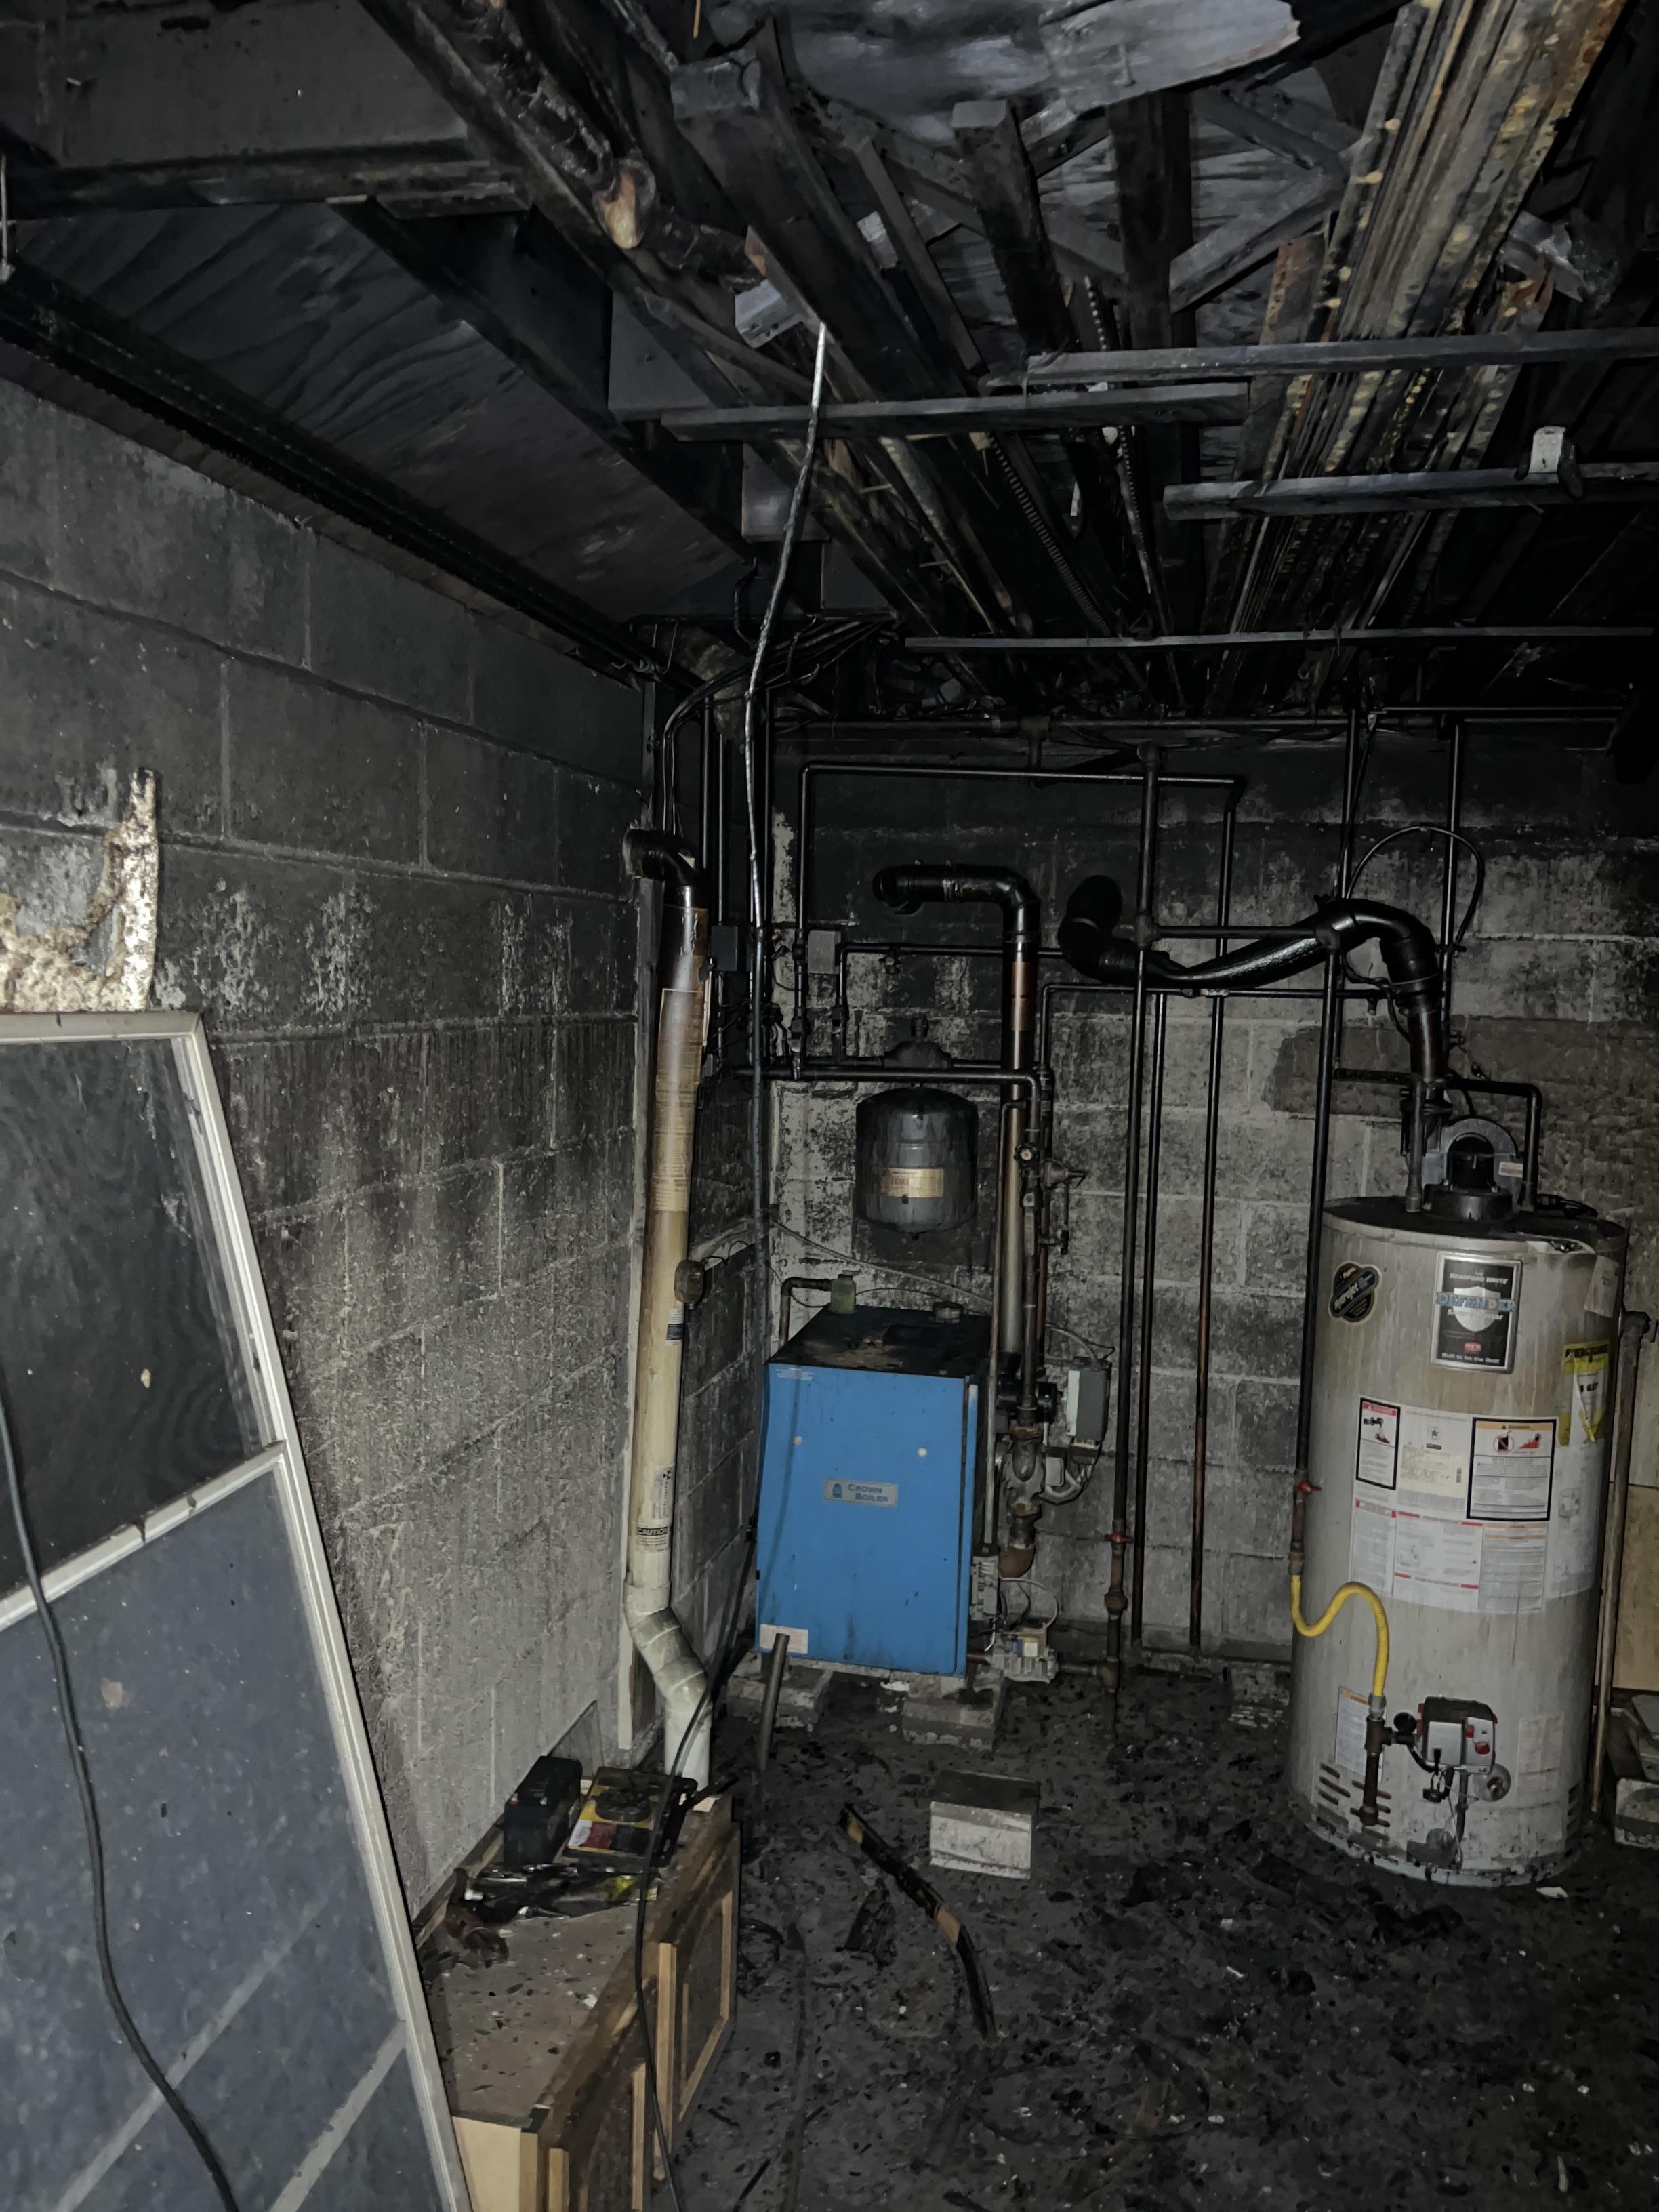 Electrical Fire Damage in Basement 